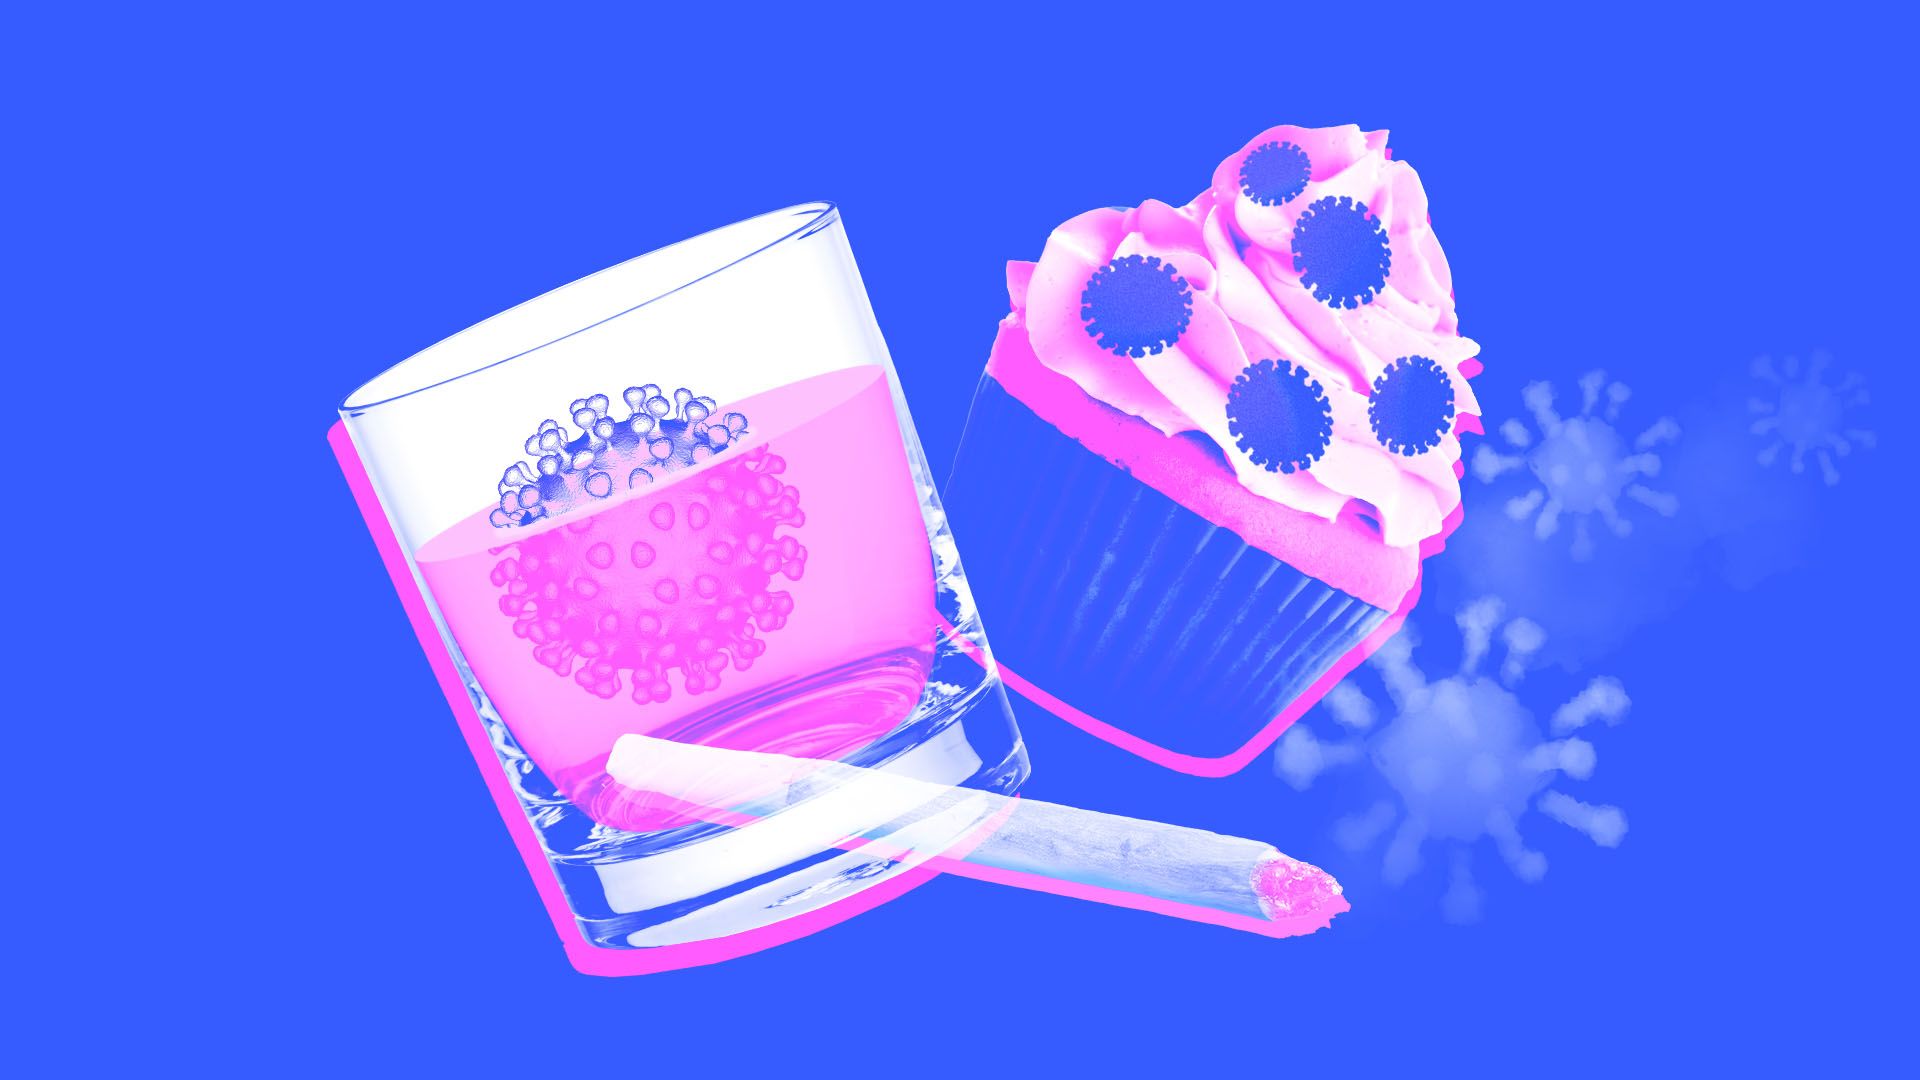 Illustration of a glass of alcohol with a virus-shaped ice cube, a cupcake with virus-shaped sprinkles, and a joint with virus-shaped smoke